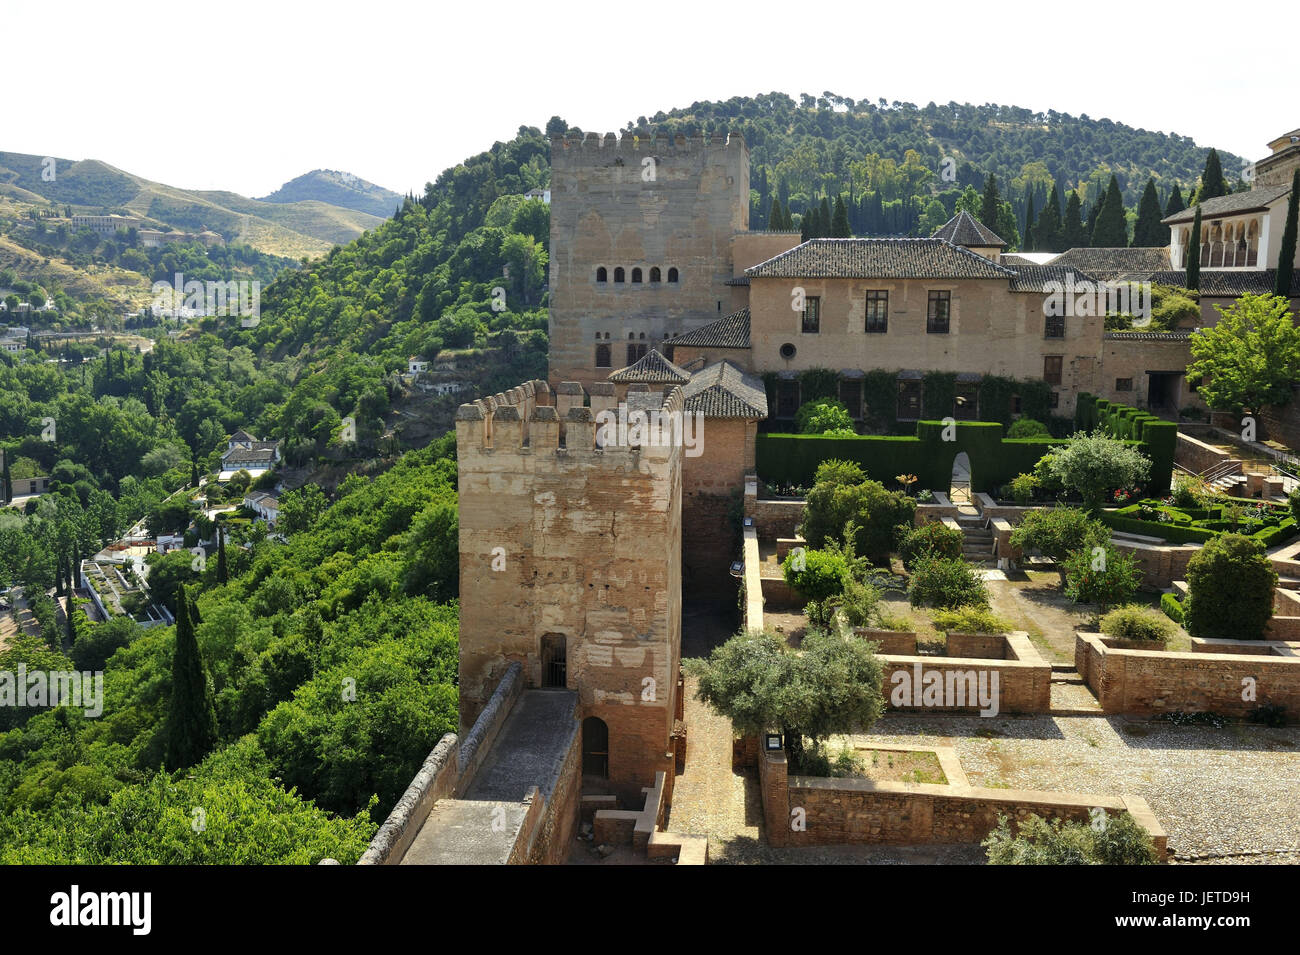 Spain, Andalusia, Granada, Alhambra palace, Alcazaba, view about the scenery, Stock Photo